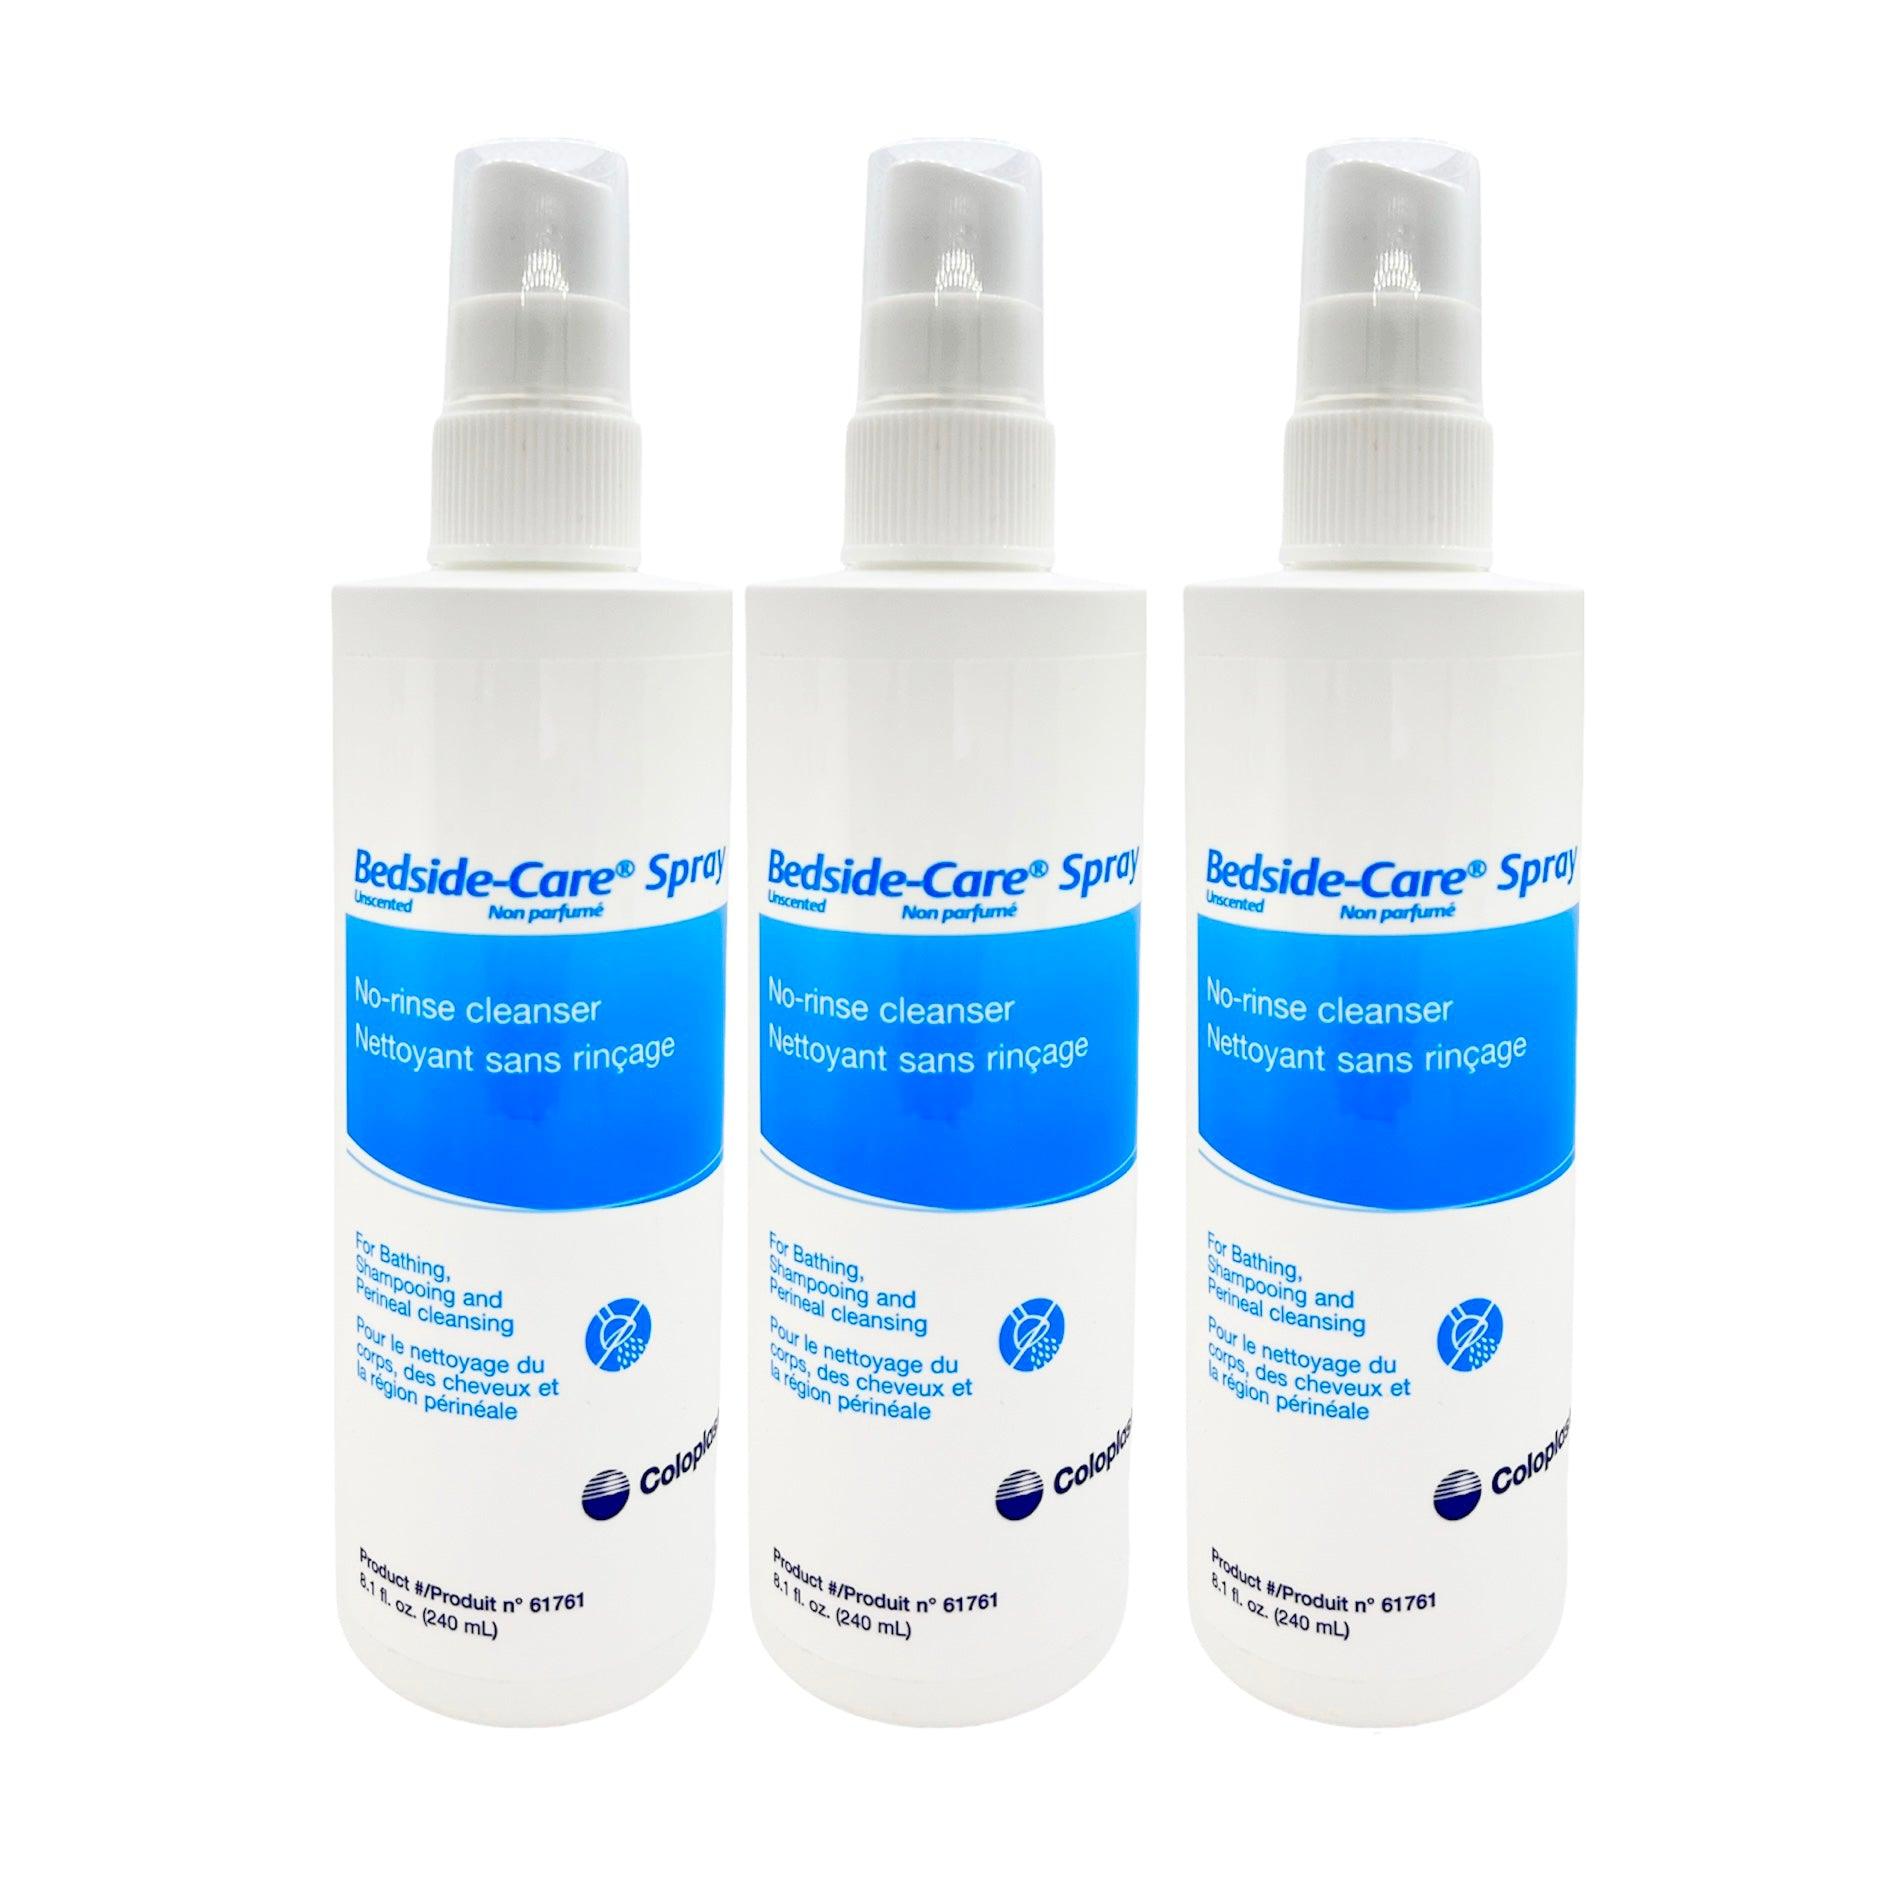 Bedside-Care Spray, Unscented Incontinent Cleanser (240mL)